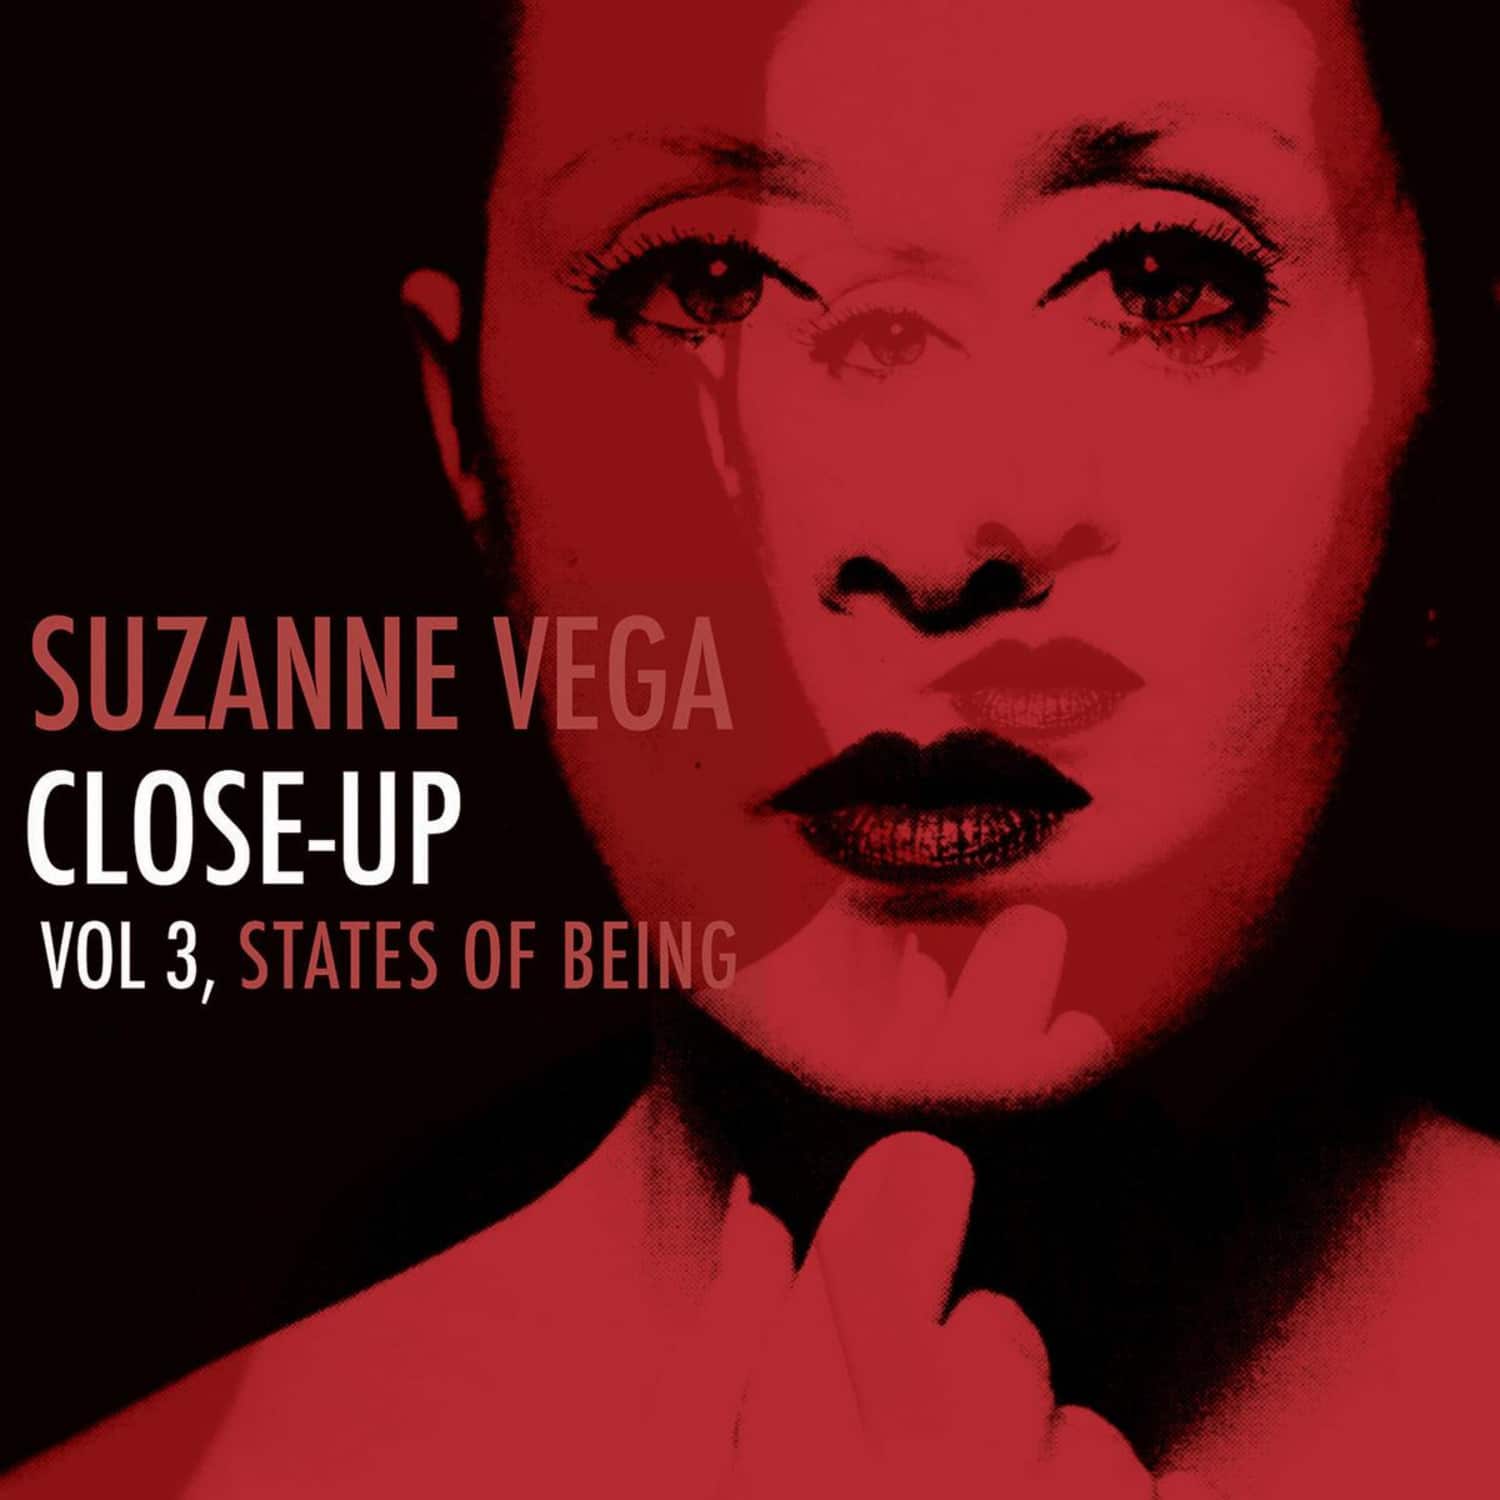 Suzanne Vega - CLOSE-UP VOL.3 - STATES OF BEING 